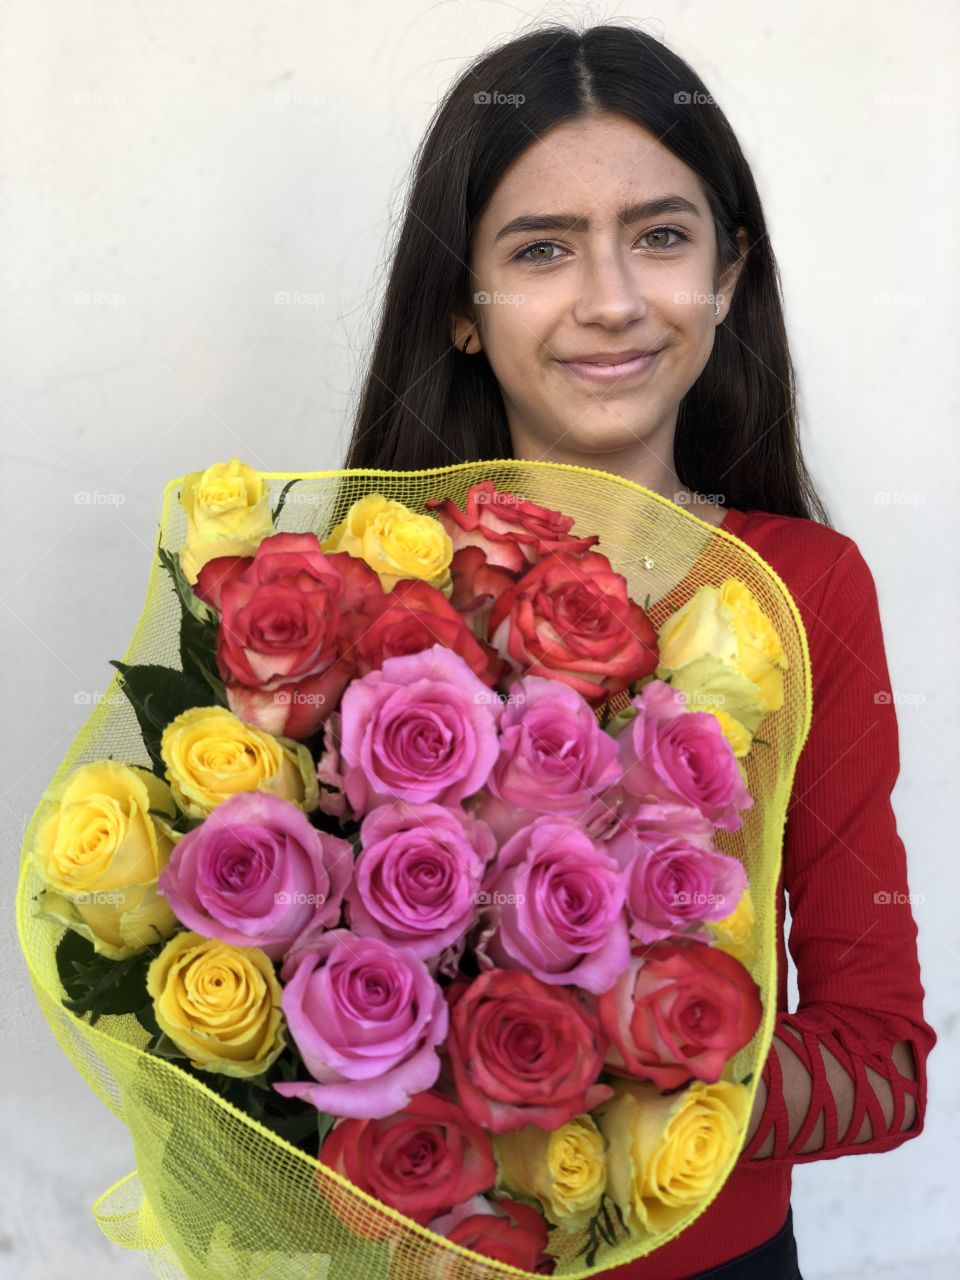 Young girl with a colorful bunch of roses